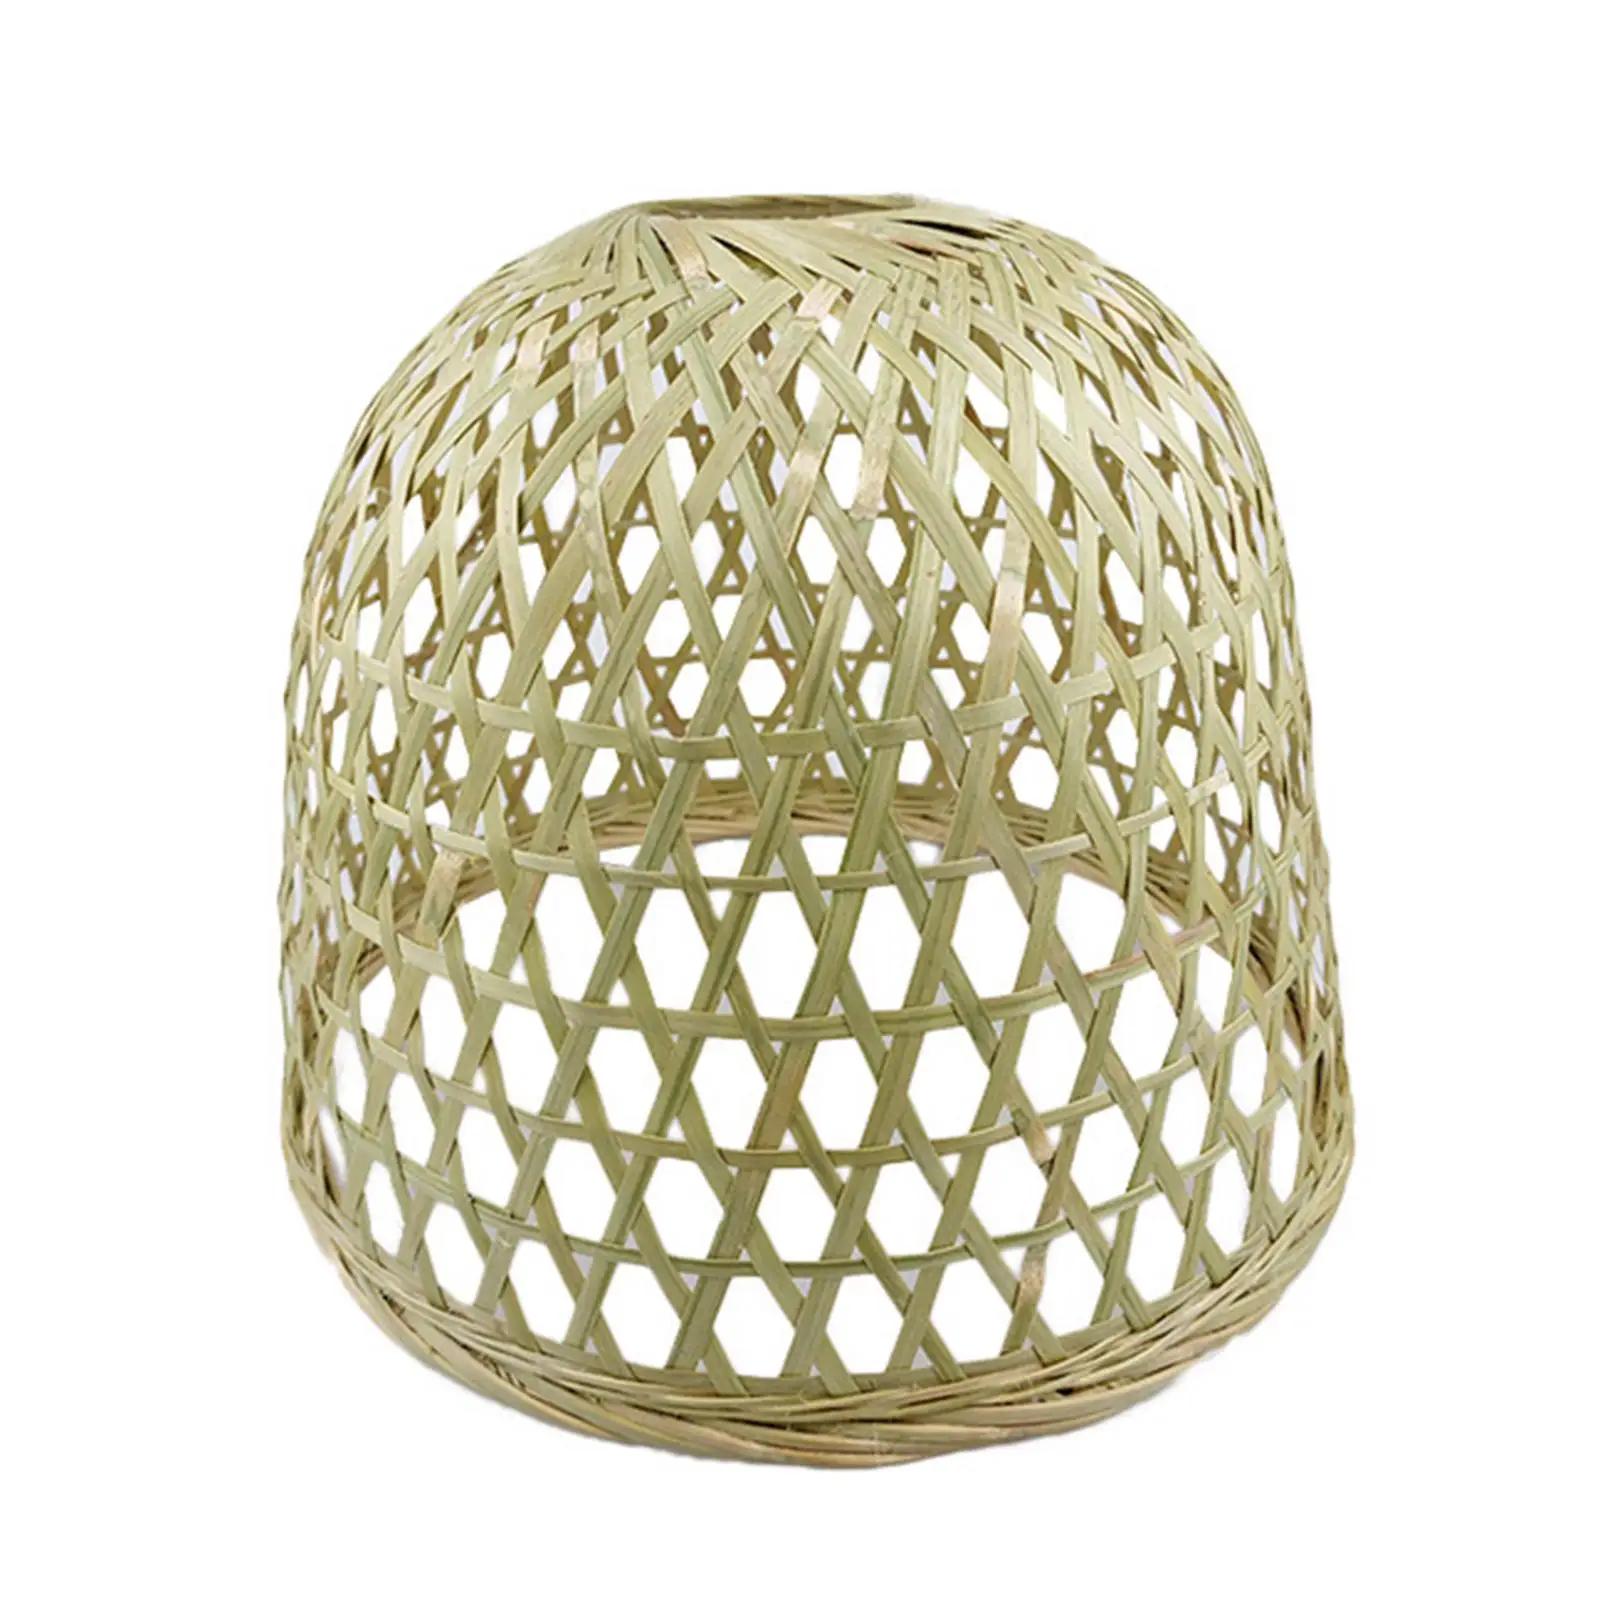 Natural Bamboo Woven Lampshade Hanging Light Fixture Handwoven Rustic Durable Round Shaped Basket for Dining Room Teahouse Hotel